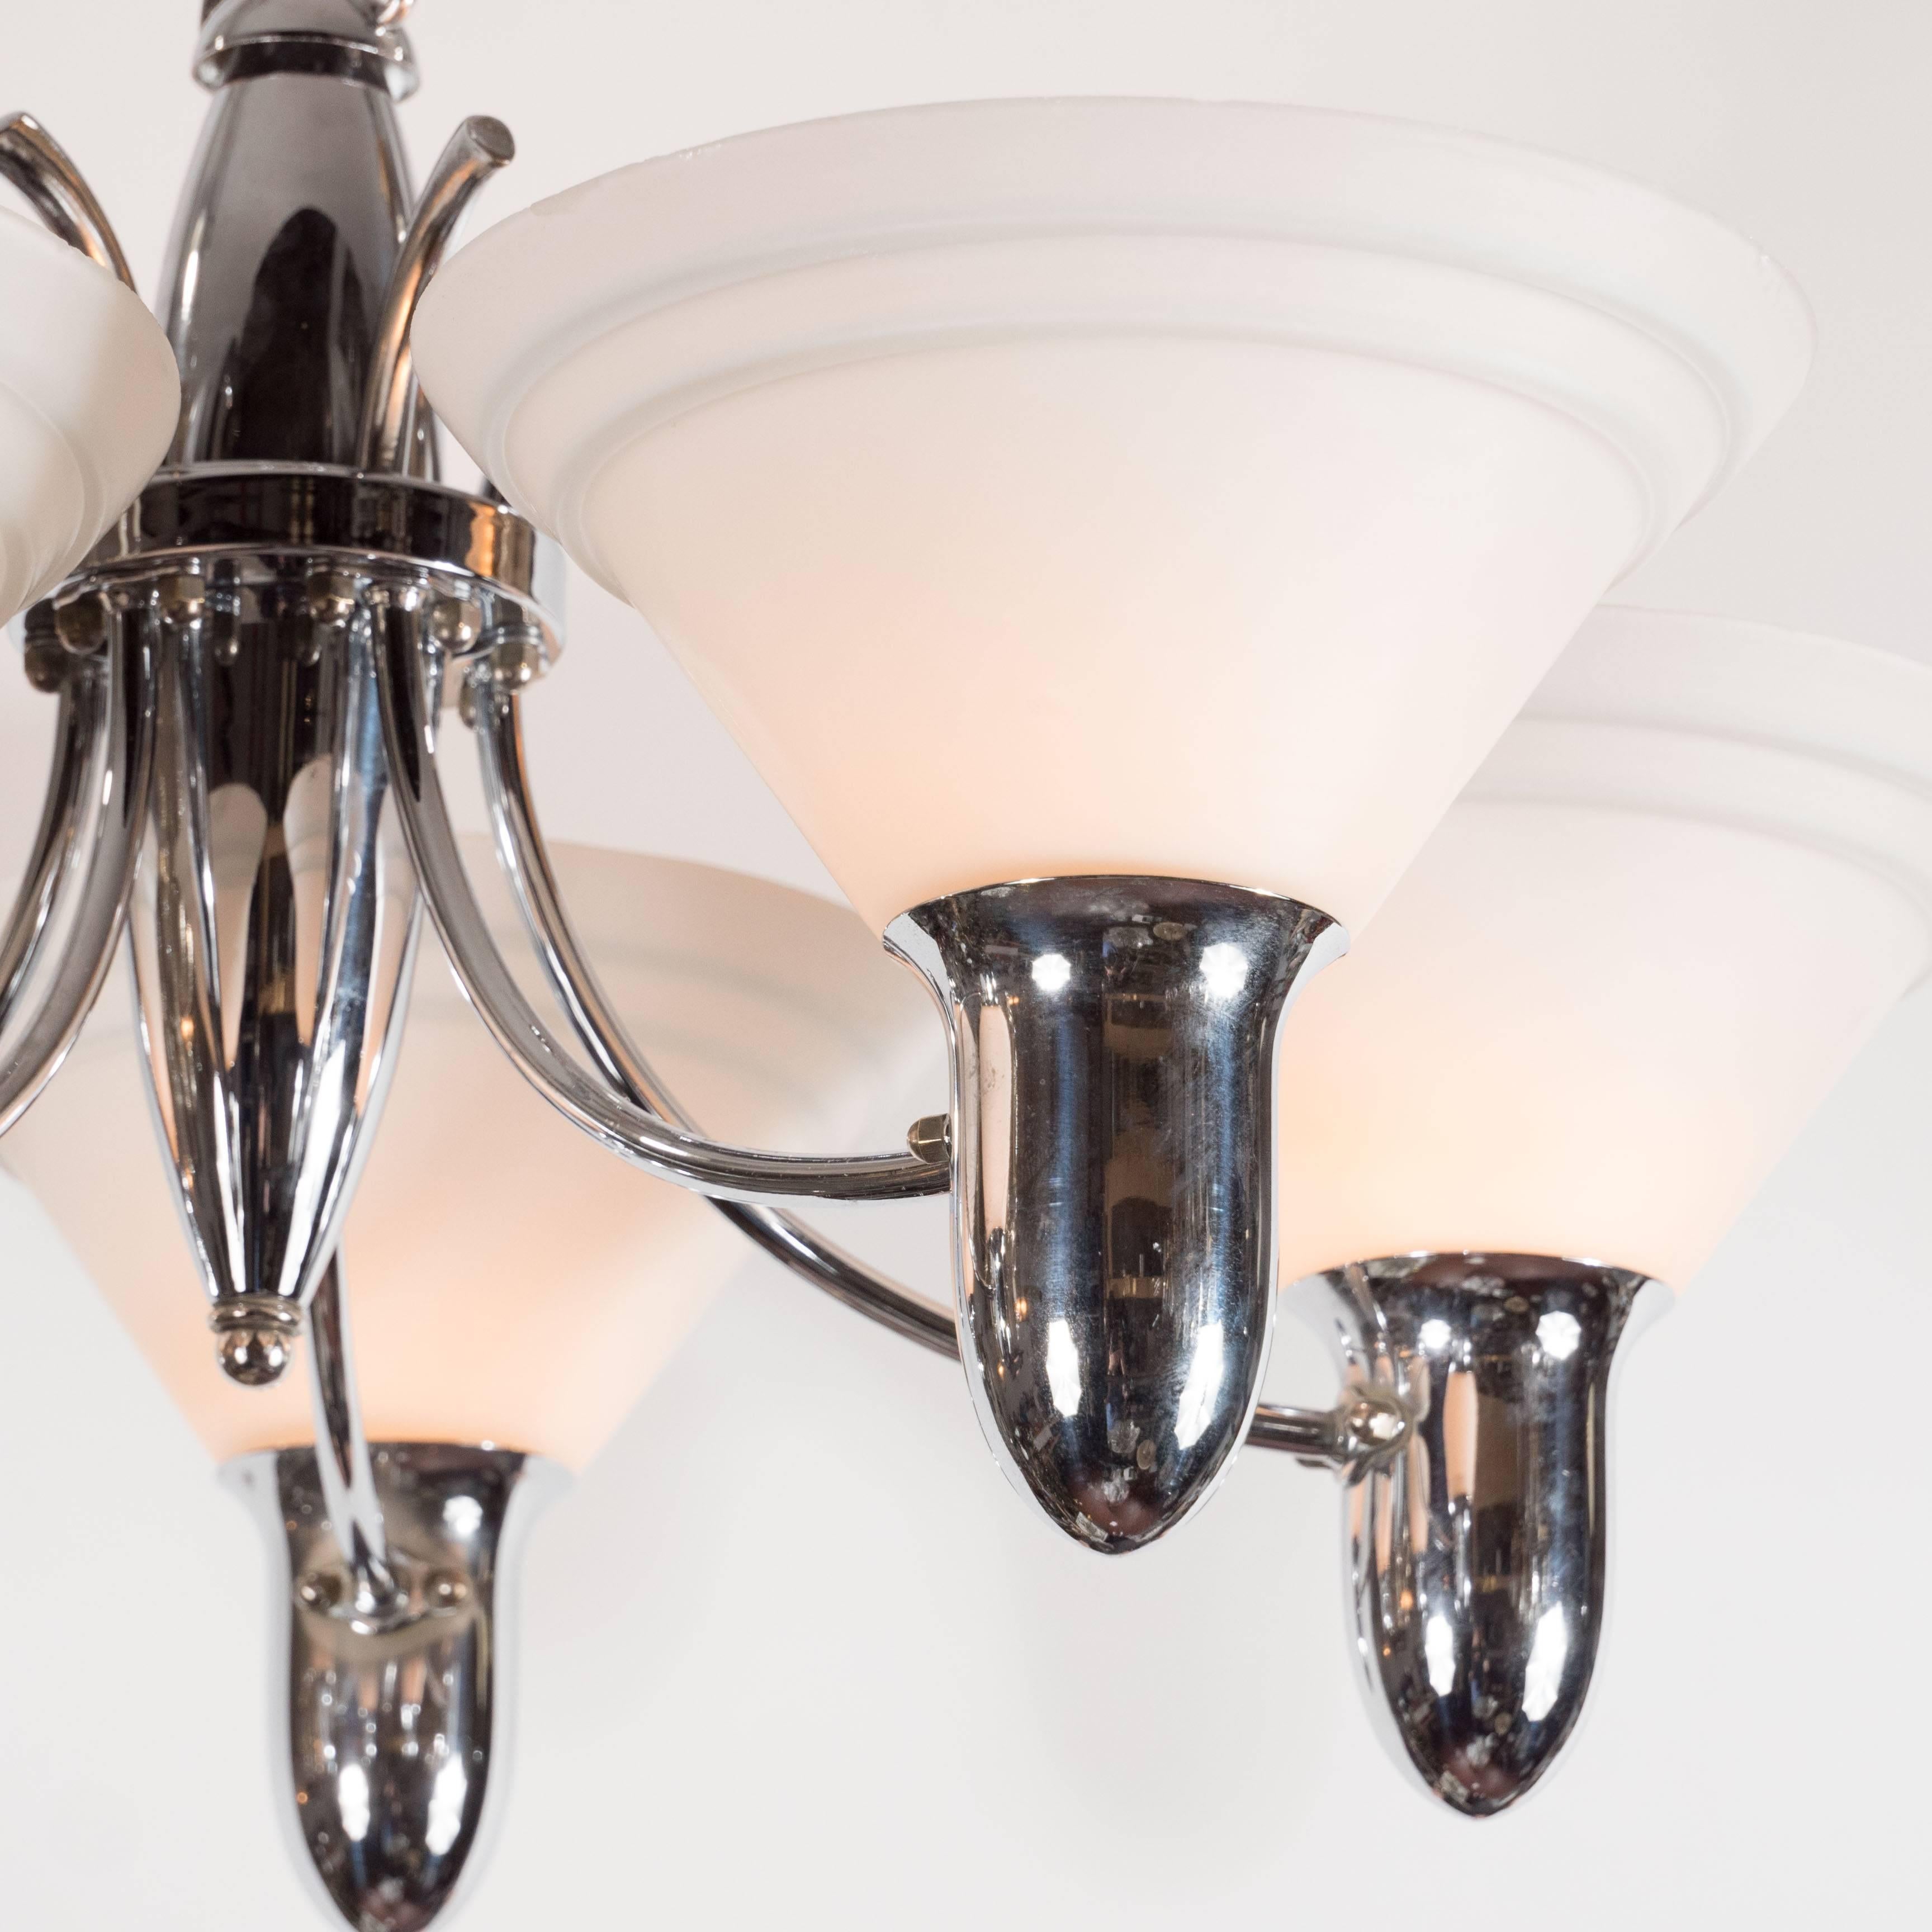 American Art Deco Machine Age Chrome and Glass Bullet Chandelier with Linear Detailing For Sale